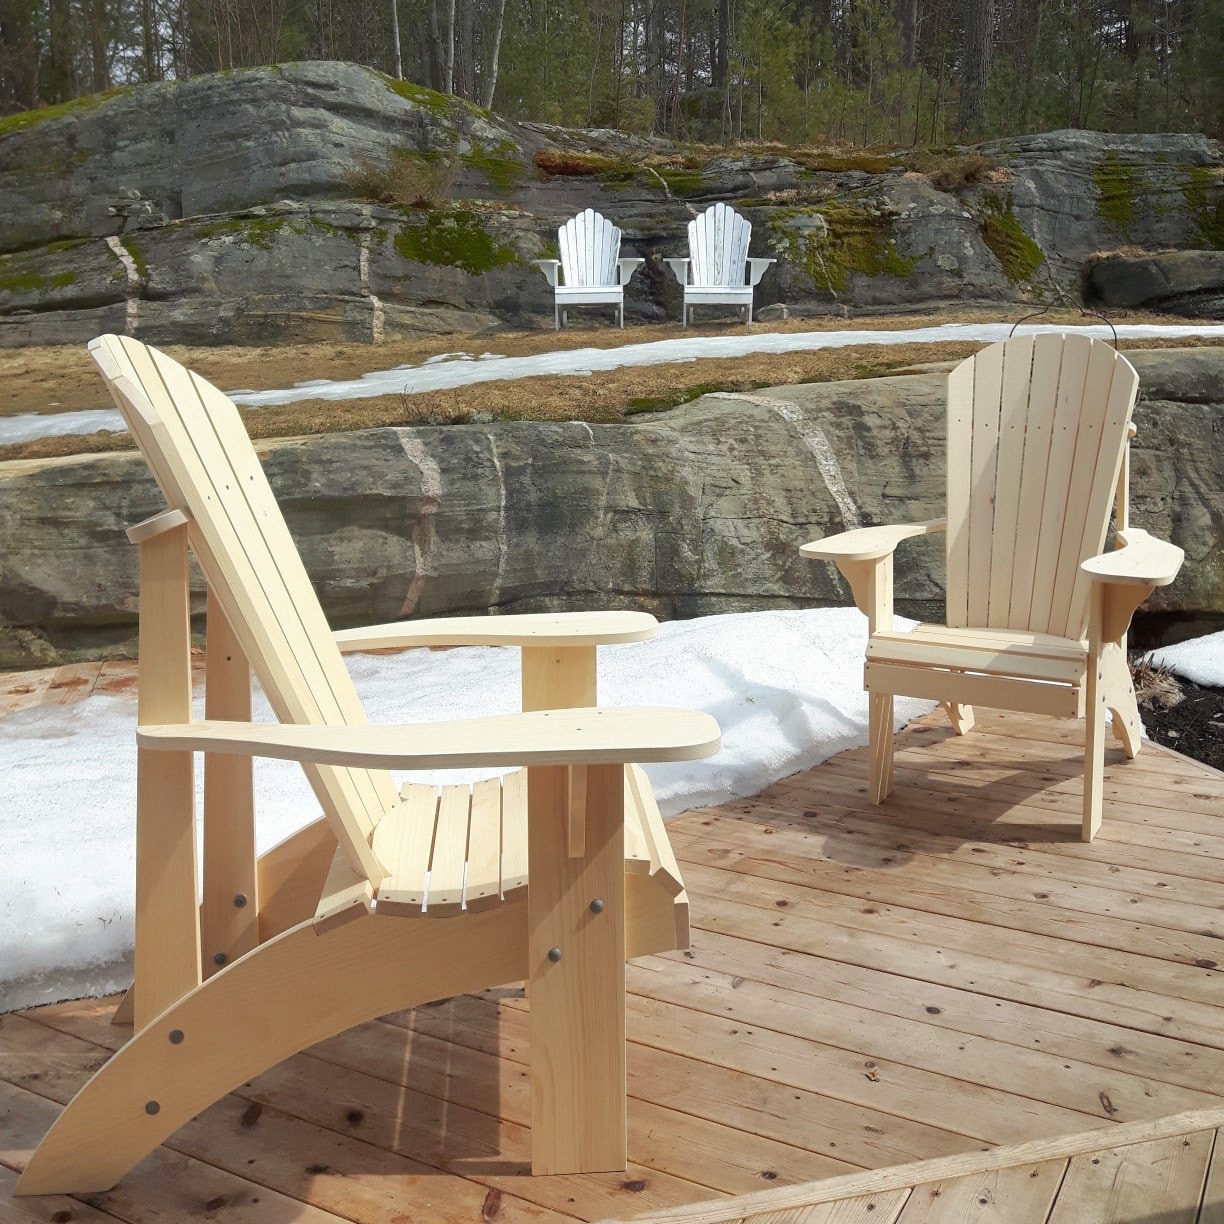 Best deals on Adirondack chairs that will make your backyard summer-ready